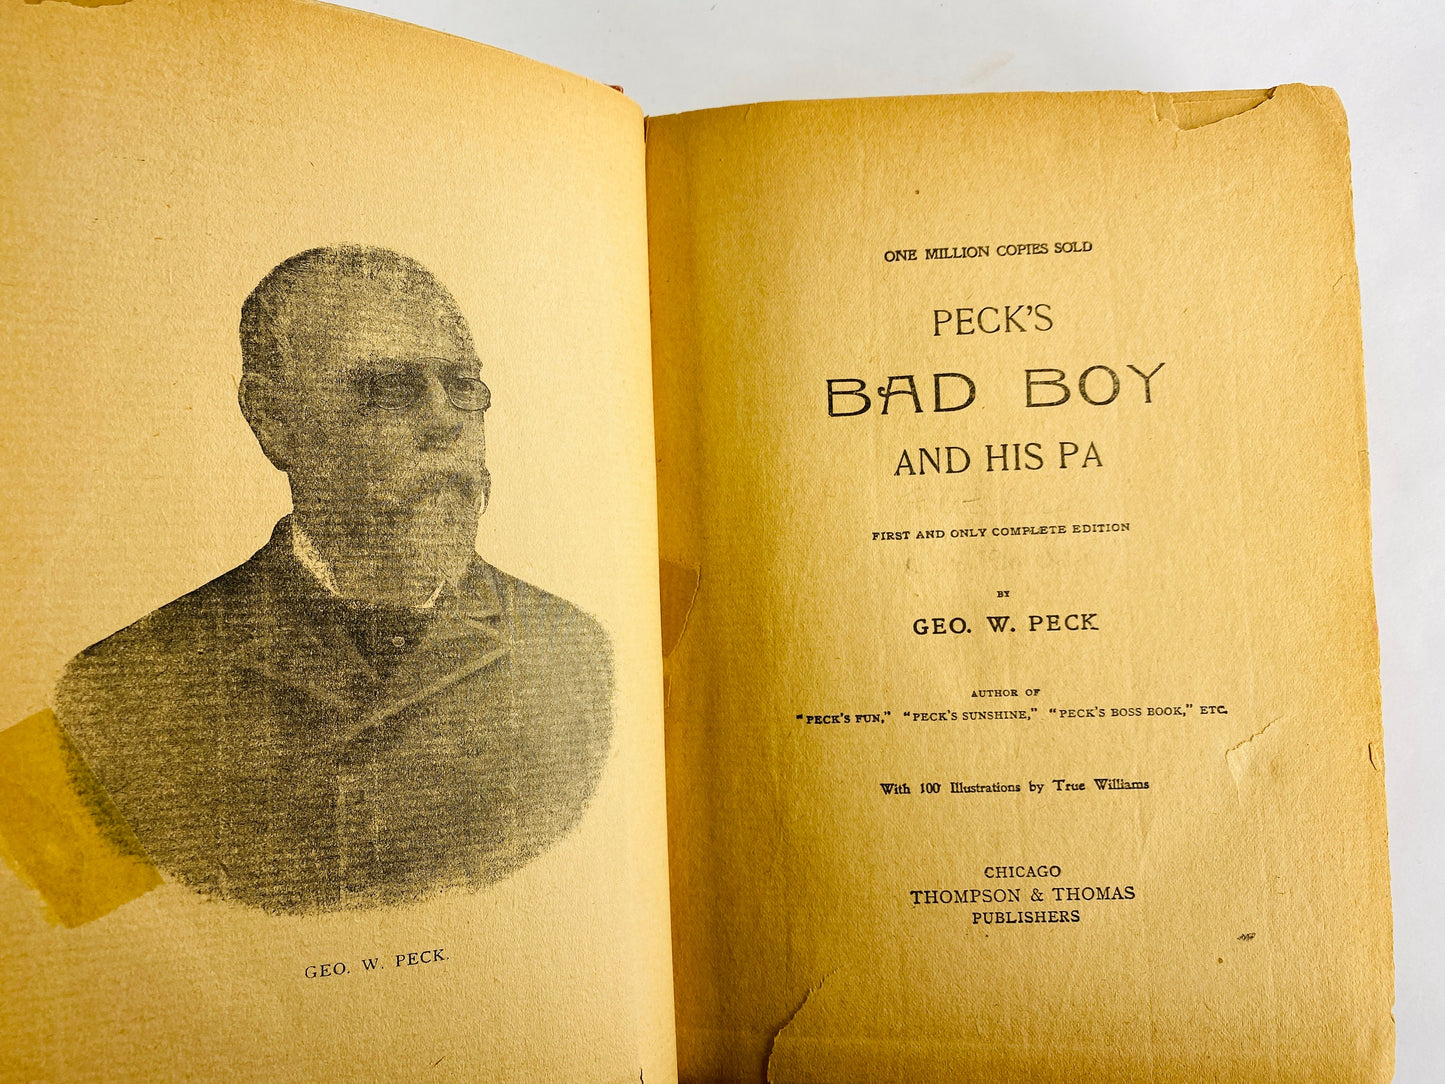 Basis for Huckleberry Finn Antique Peck's Bad Boy and his Pa by George Peck vintage book circa 1900 abou the mischievous prankster Red decor